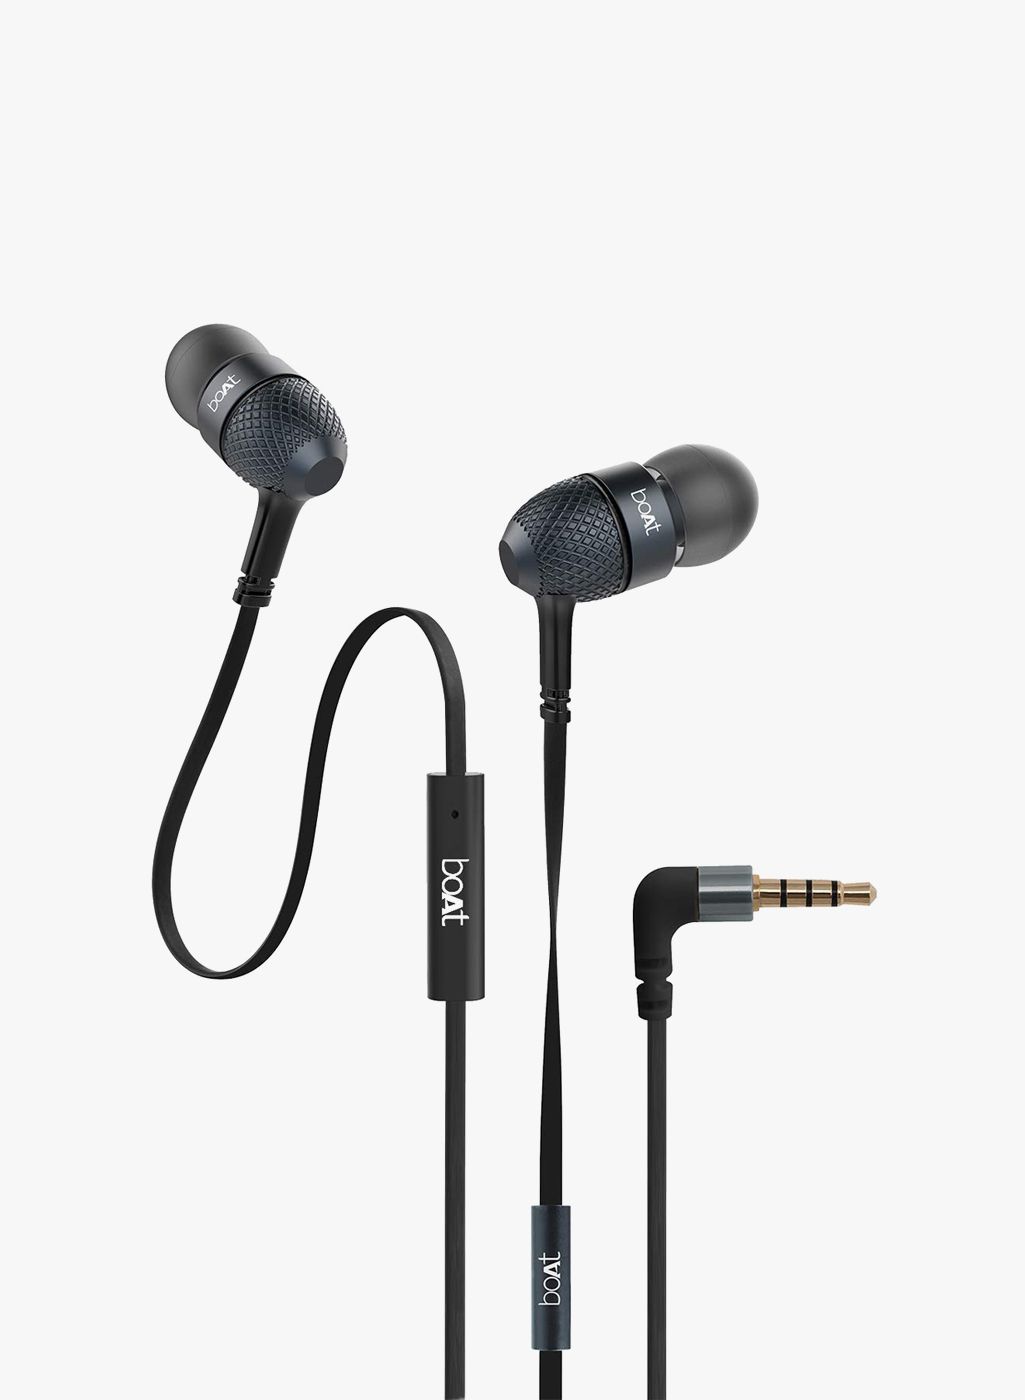 Black Bassheads 220 Super Extra Bass Wired In-Ear Headphones With Mic Price in India